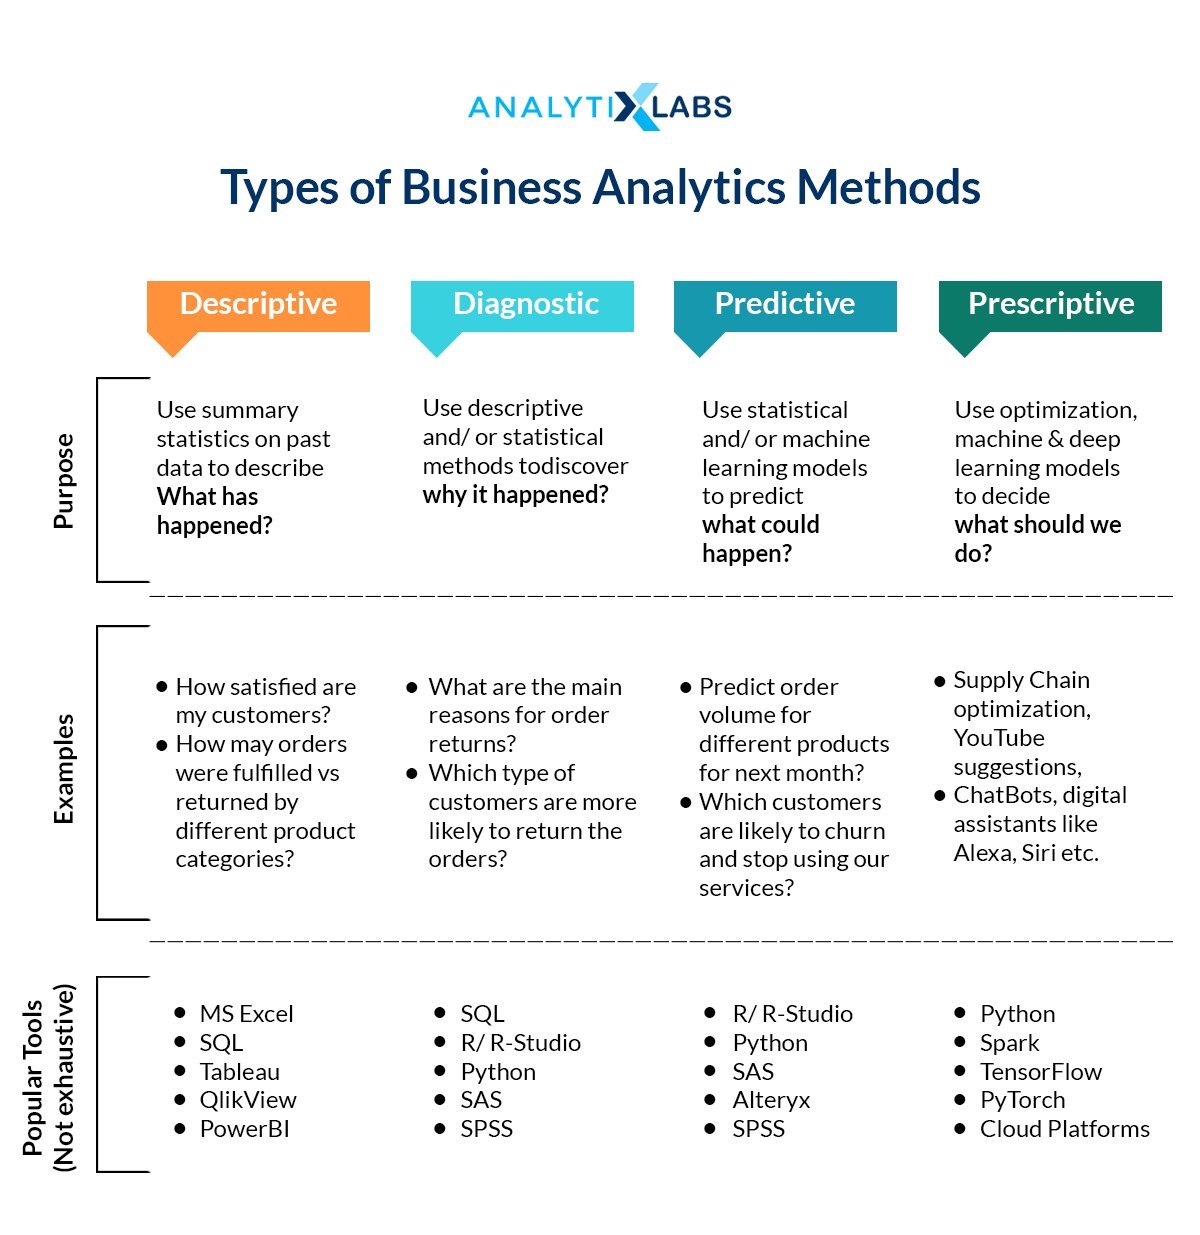 Type of Business Analytics Methods and Stages of Business Analytics